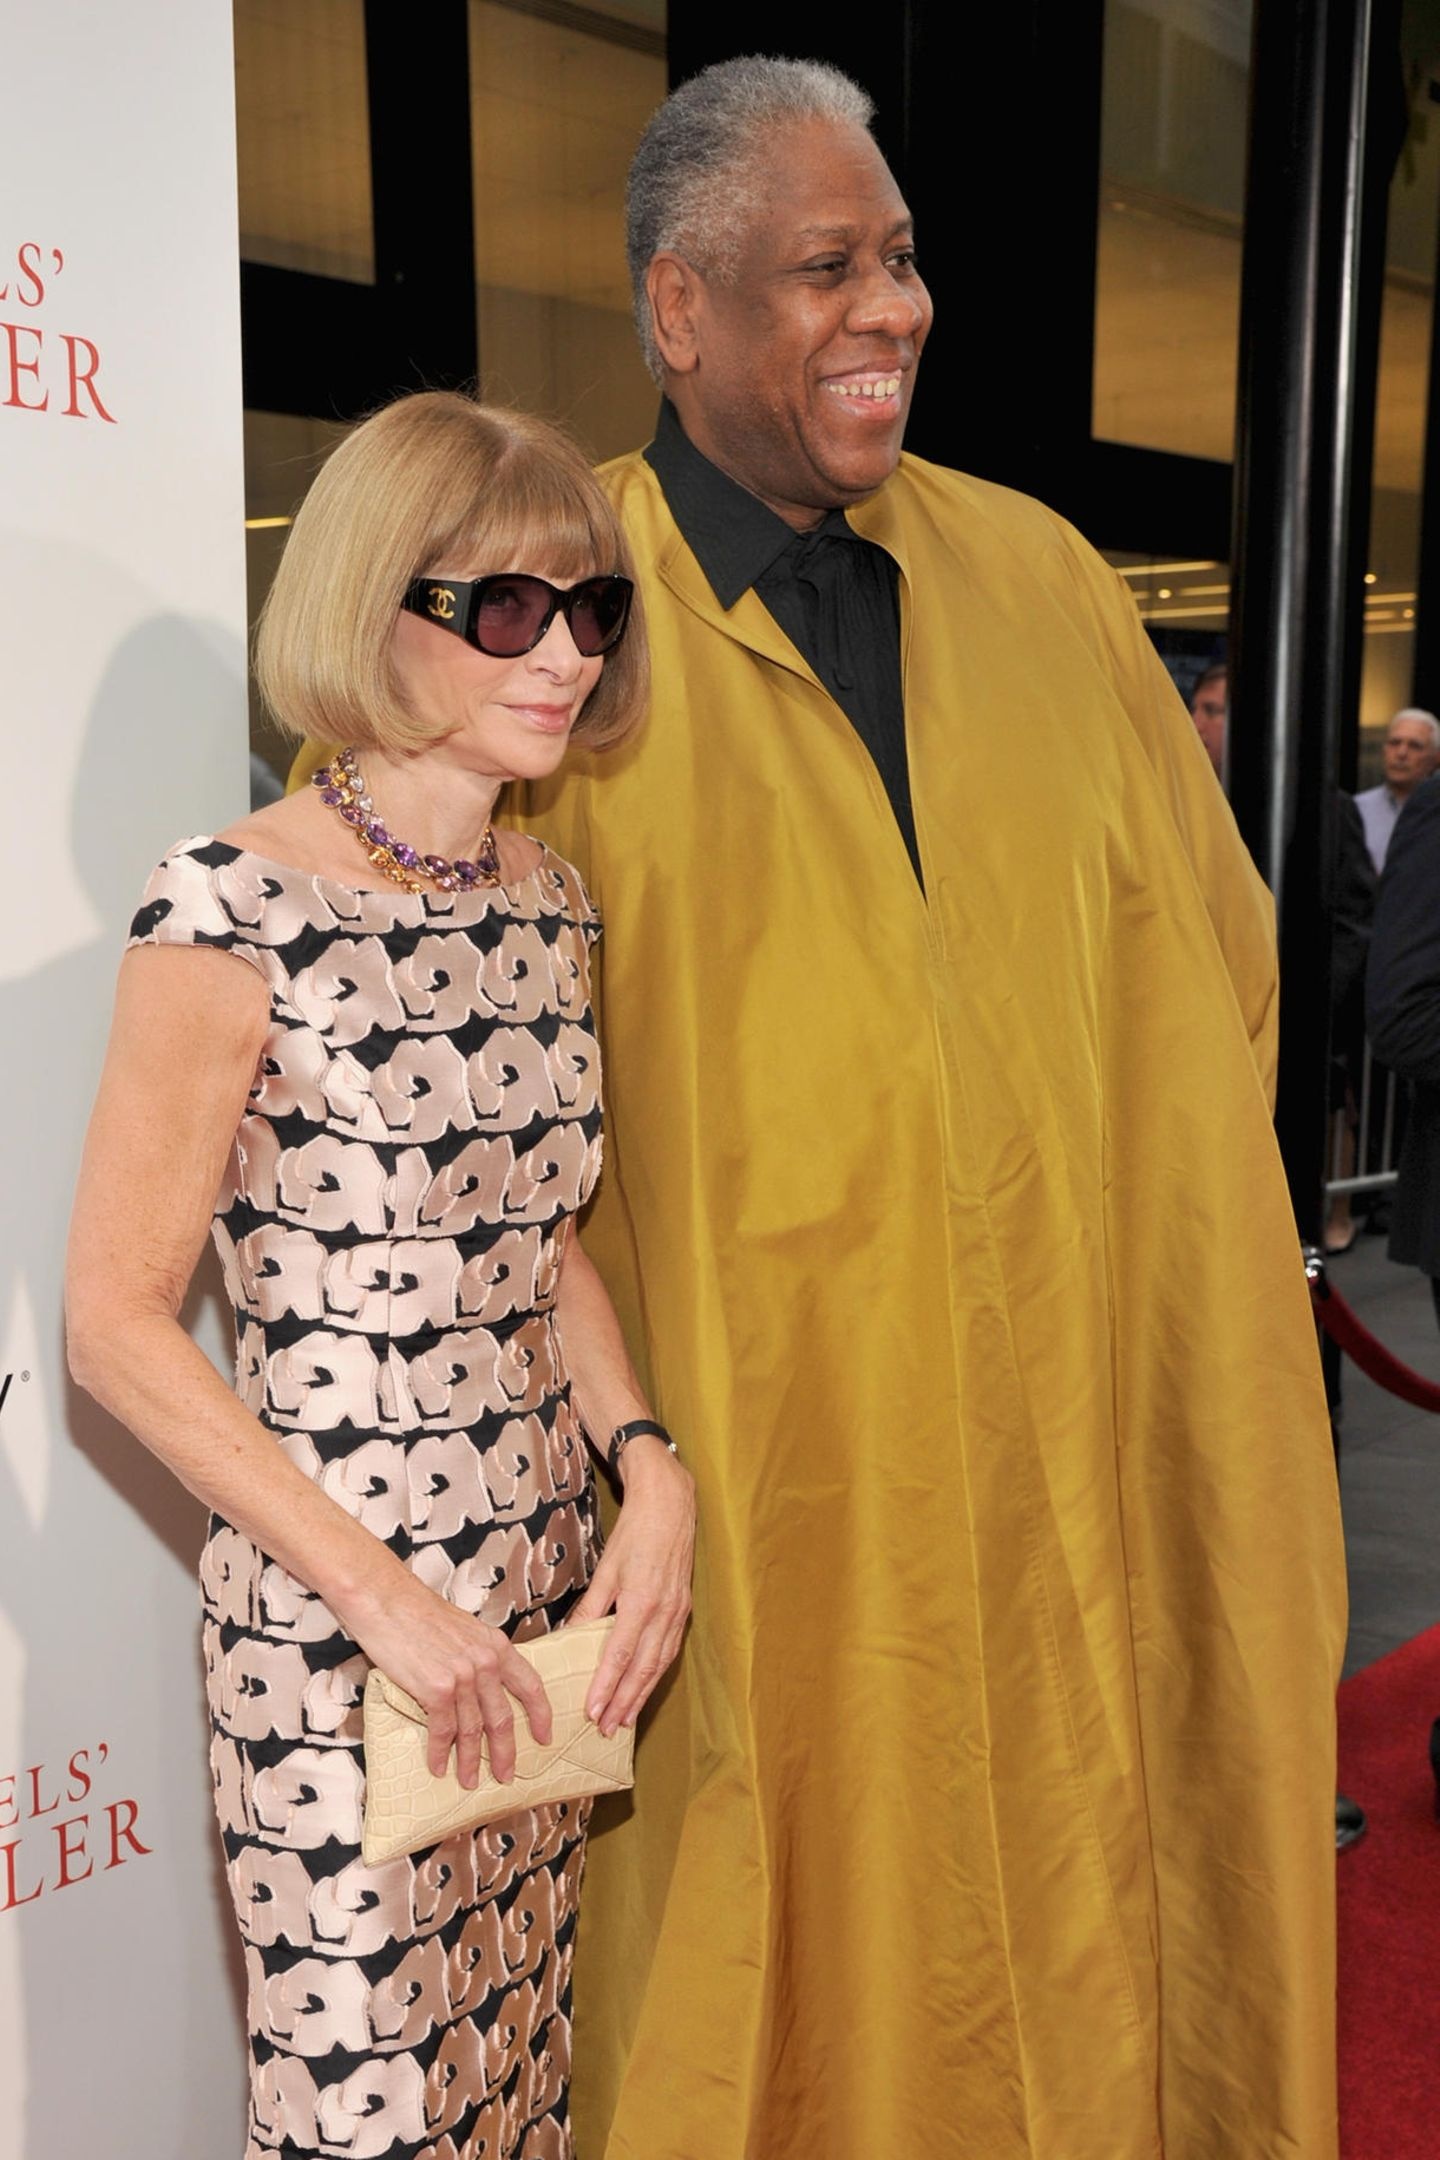 Anna Wintour: Became the editor-in-chief of American Vogue, in 1988. 1440x2160 HD Wallpaper.